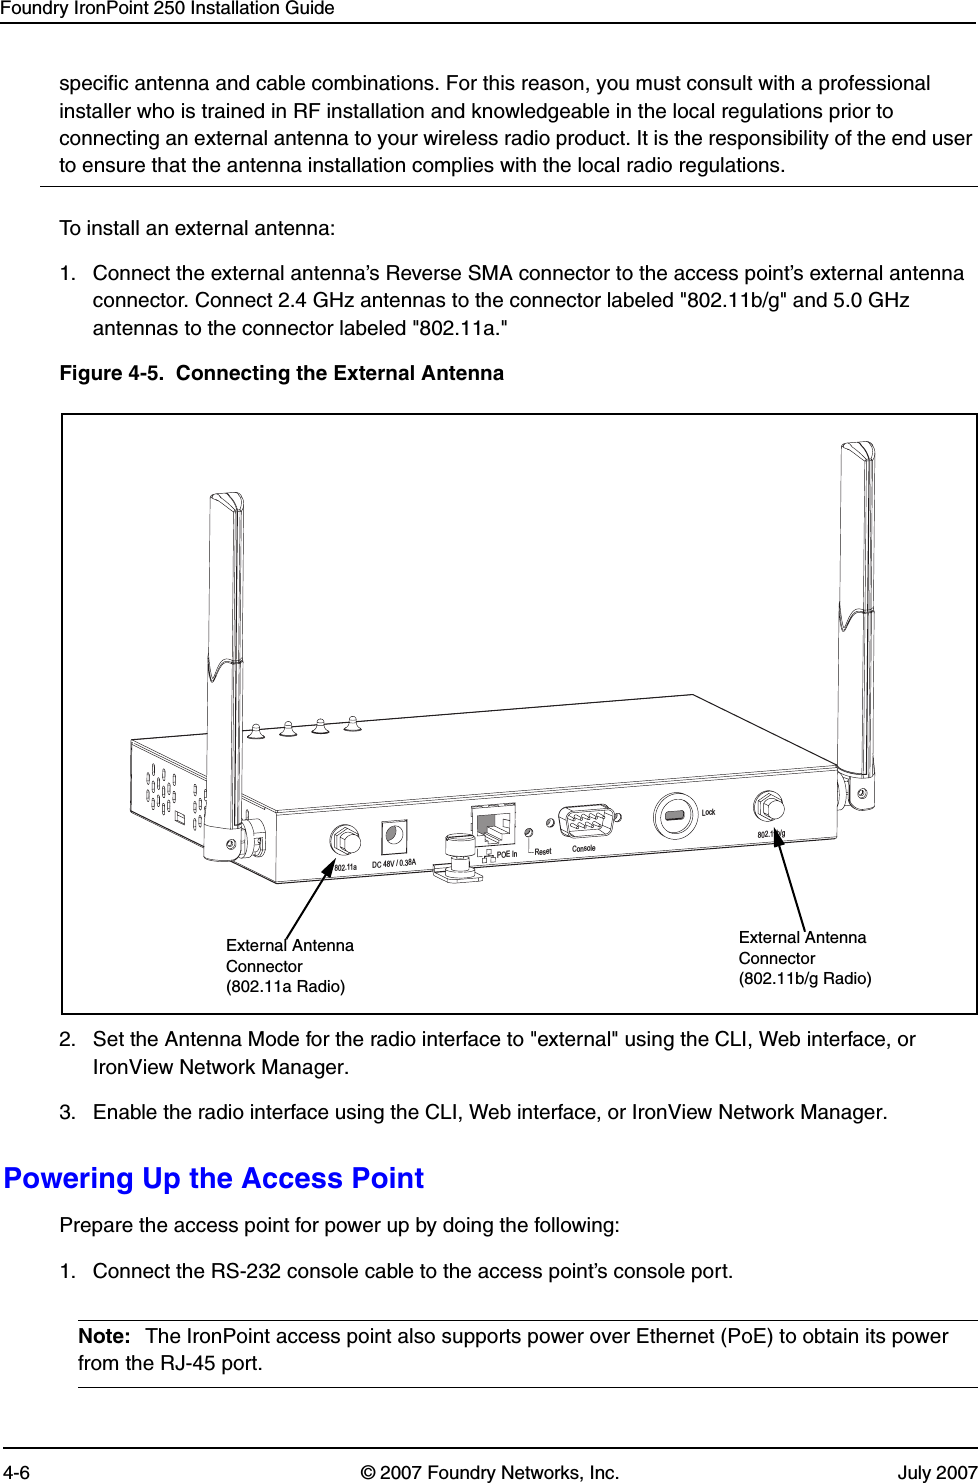 Foundry IronPoint 250 Installation Guide4-6 © 2007 Foundry Networks, Inc. July 2007specific antenna and cable combinations. For this reason, you must consult with a professional installer who is trained in RF installation and knowledgeable in the local regulations prior to connecting an external antenna to your wireless radio product. It is the responsibility of the end user to ensure that the antenna installation complies with the local radio regulations.To install an external antenna:1. Connect the external antenna’s Reverse SMA connector to the access point’s external antenna connector. Connect 2.4 GHz antennas to the connector labeled &quot;802.11b/g&quot; and 5.0 GHz antennas to the connector labeled &quot;802.11a.&quot;Figure 4-5.  Connecting the External Antenna2. Set the Antenna Mode for the radio interface to &quot;external&quot; using the CLI, Web interface, or IronView Network Manager.3. Enable the radio interface using the CLI, Web interface, or IronView Network Manager.Powering Up the Access PointPrepare the access point for power up by doing the following: 1. Connect the RS-232 console cable to the access point’s console port.Note: The IronPoint access point also supports power over Ethernet (PoE) to obtain its power from the RJ-45 port. DC48V / 0.38A POEIn Reset ConsoleLock802.11b/g802.11aExternal Antenna Connector (802.11b/g Radio)External Antenna Connector (802.11a Radio)